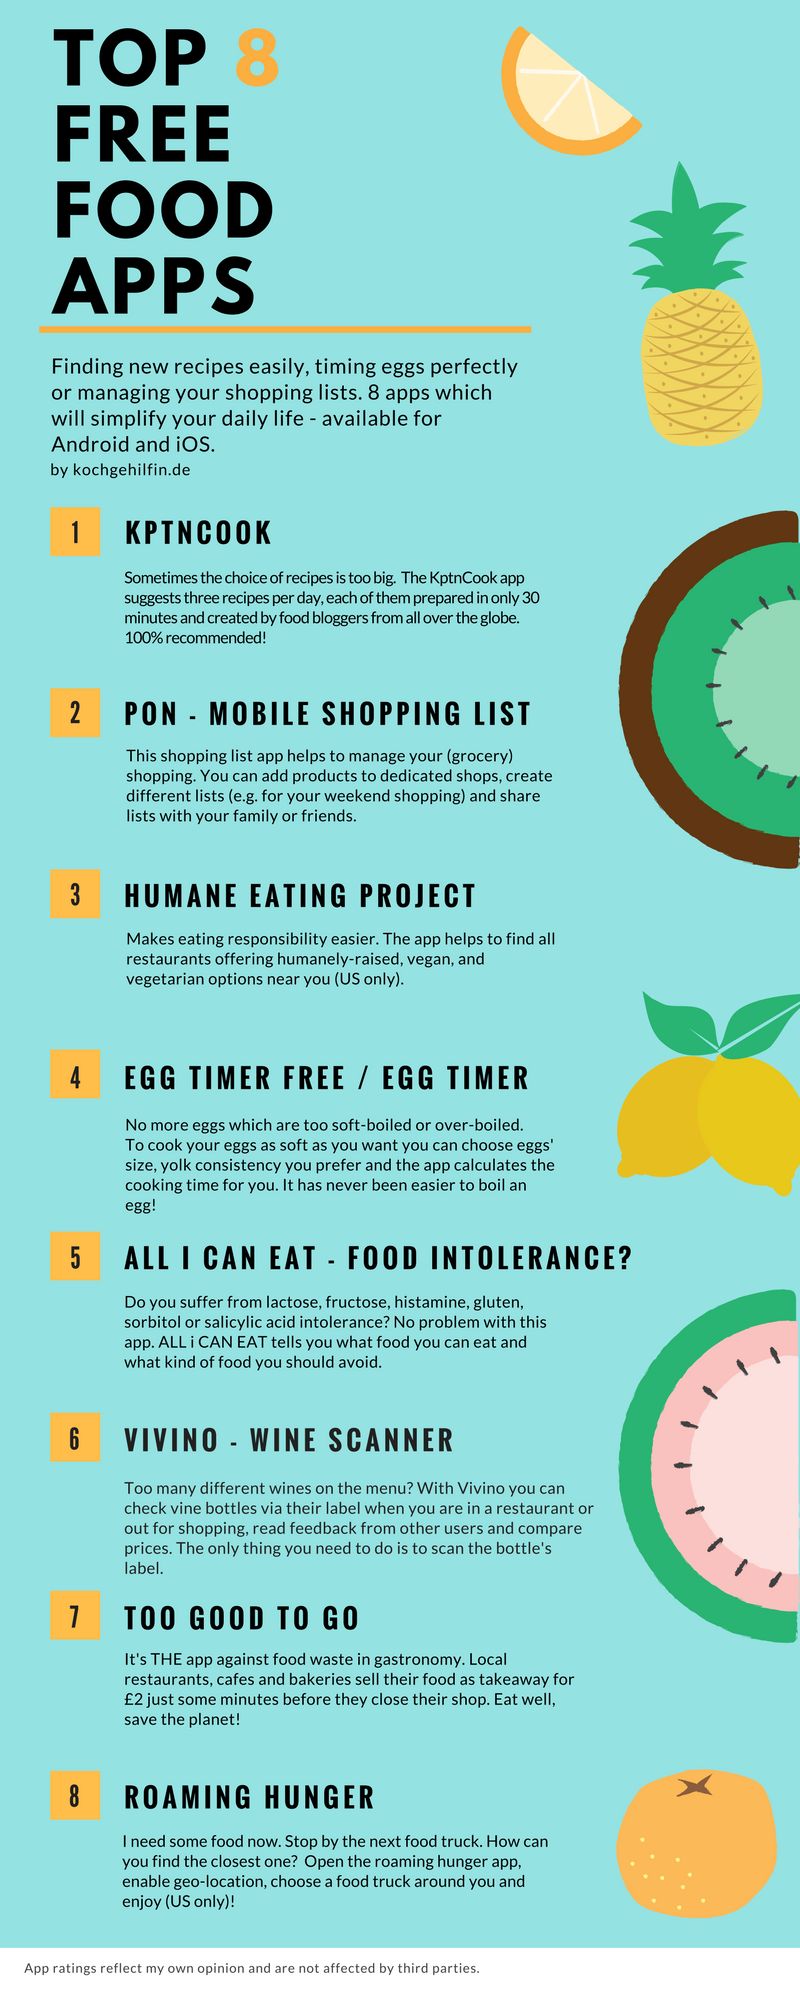 Top 8 free food apps